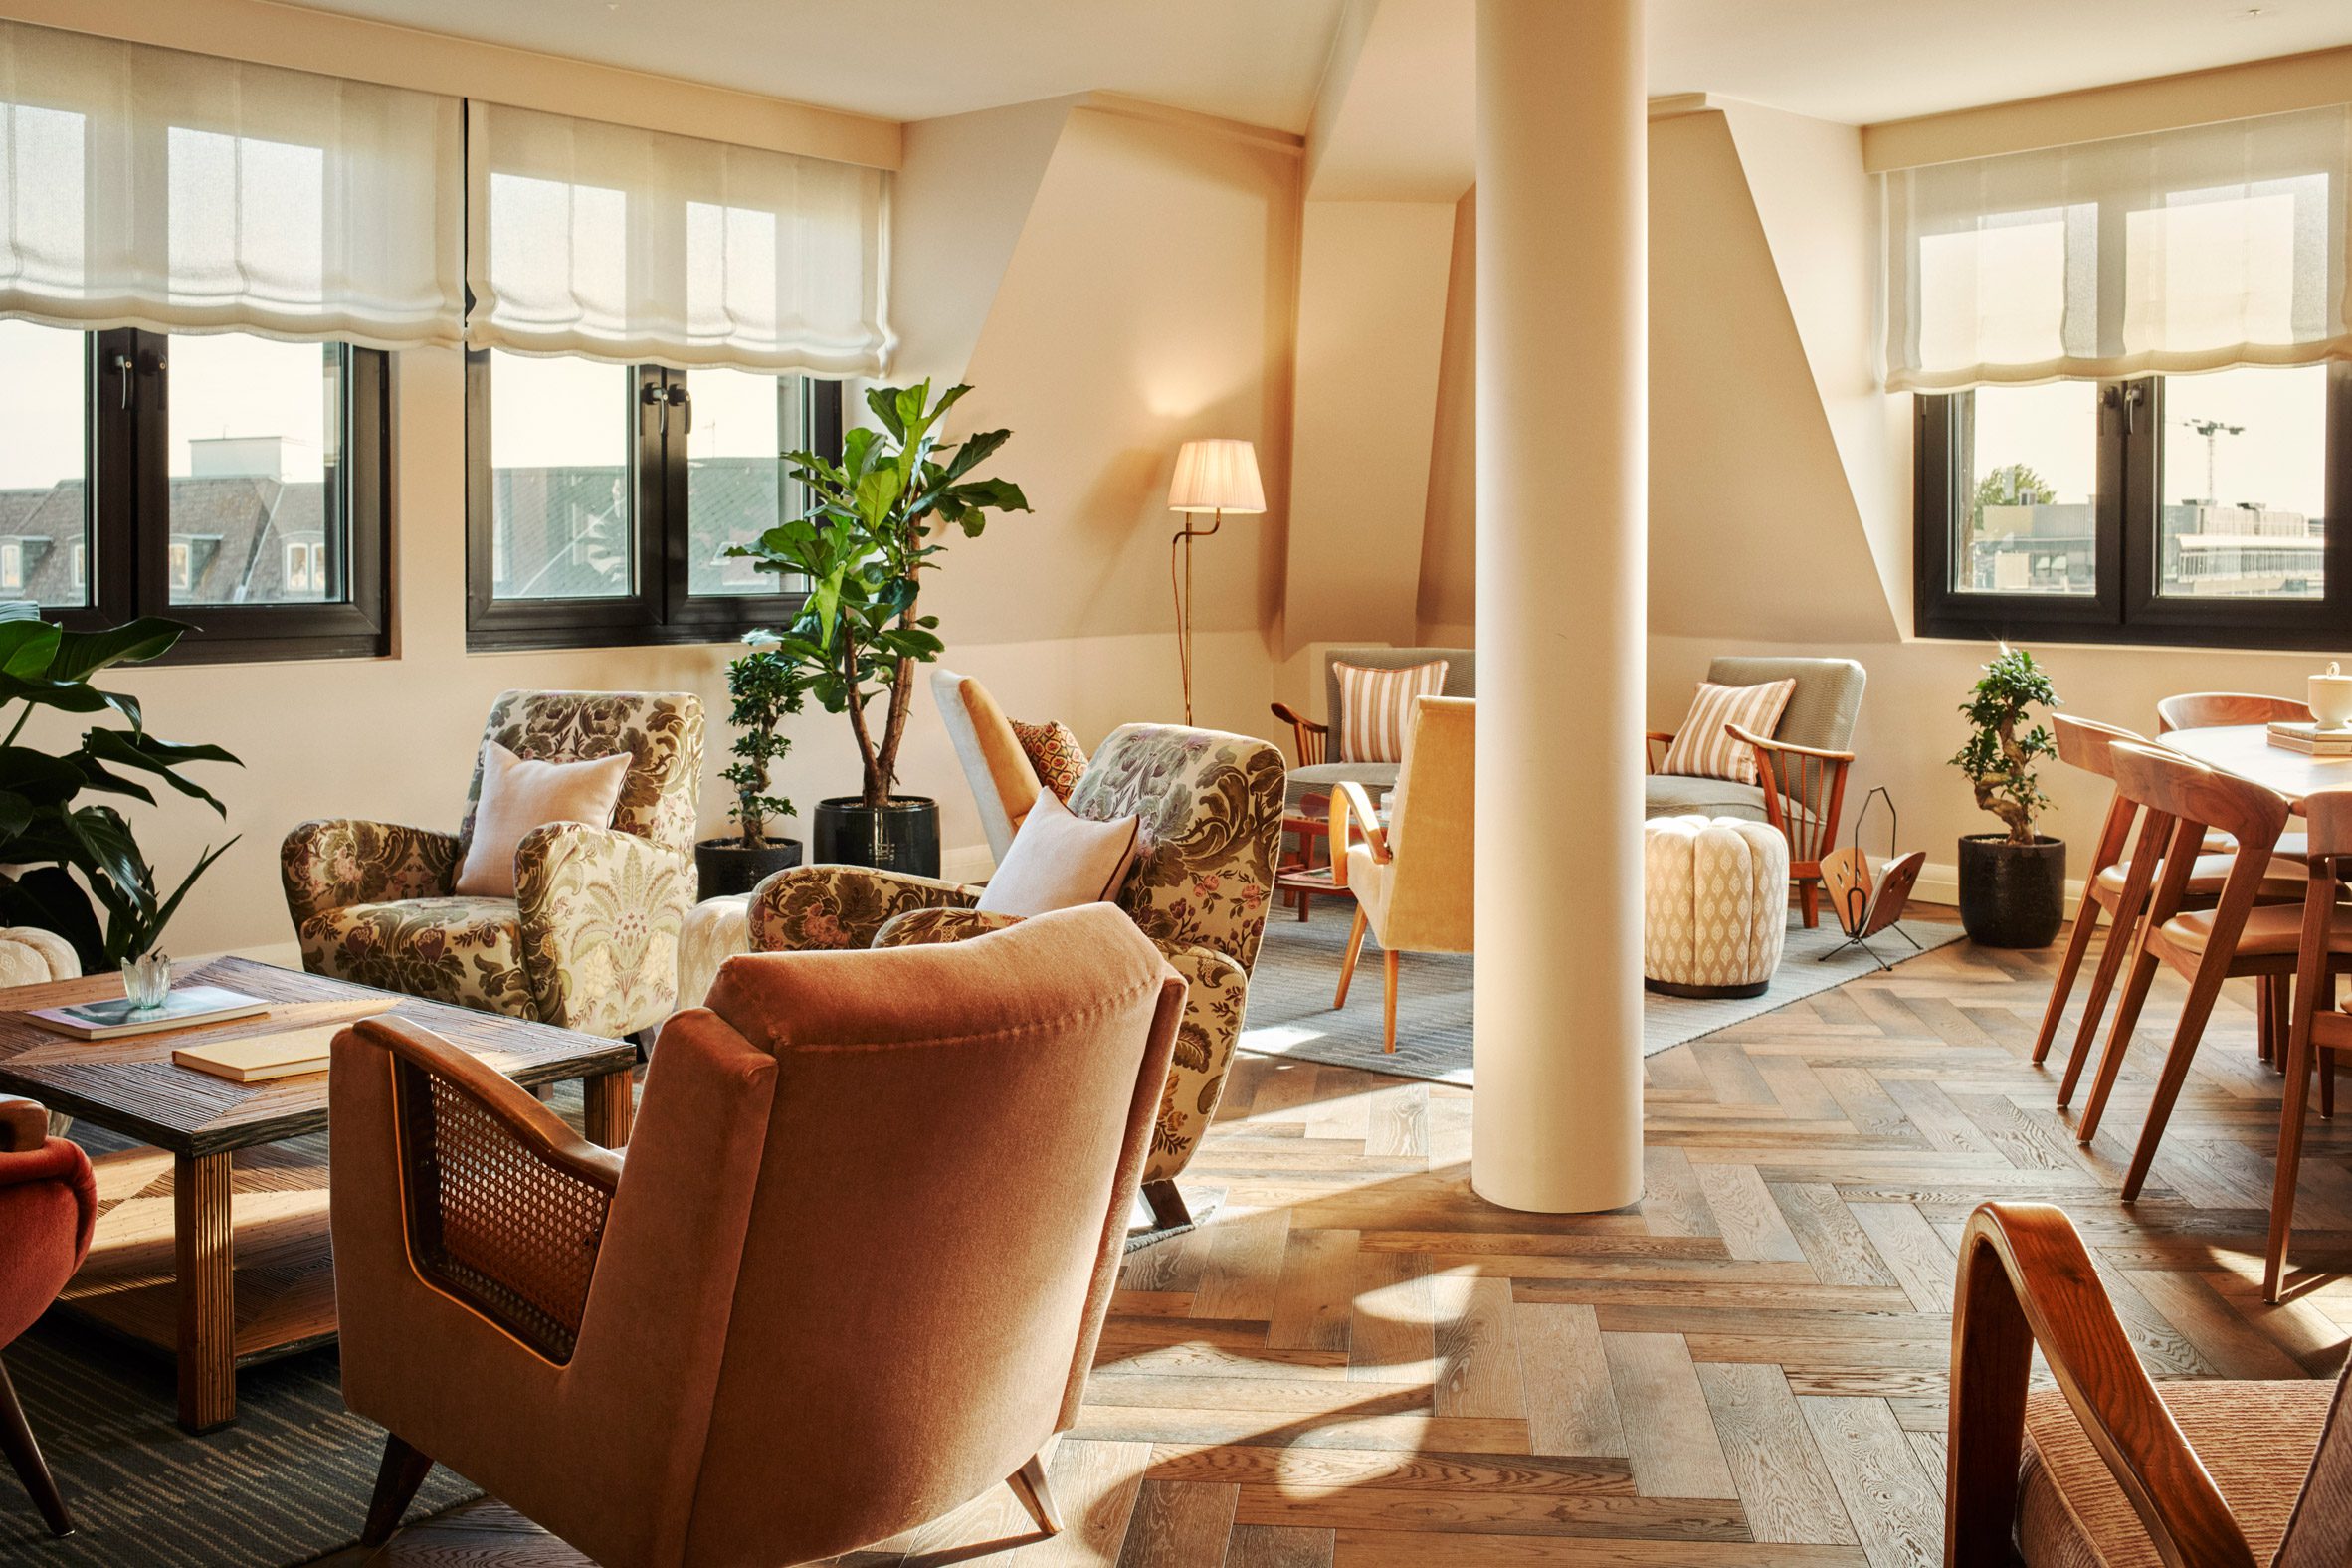 Overview of The Apartment inside The Hoxton hotel in Charlottenburg, Berlin